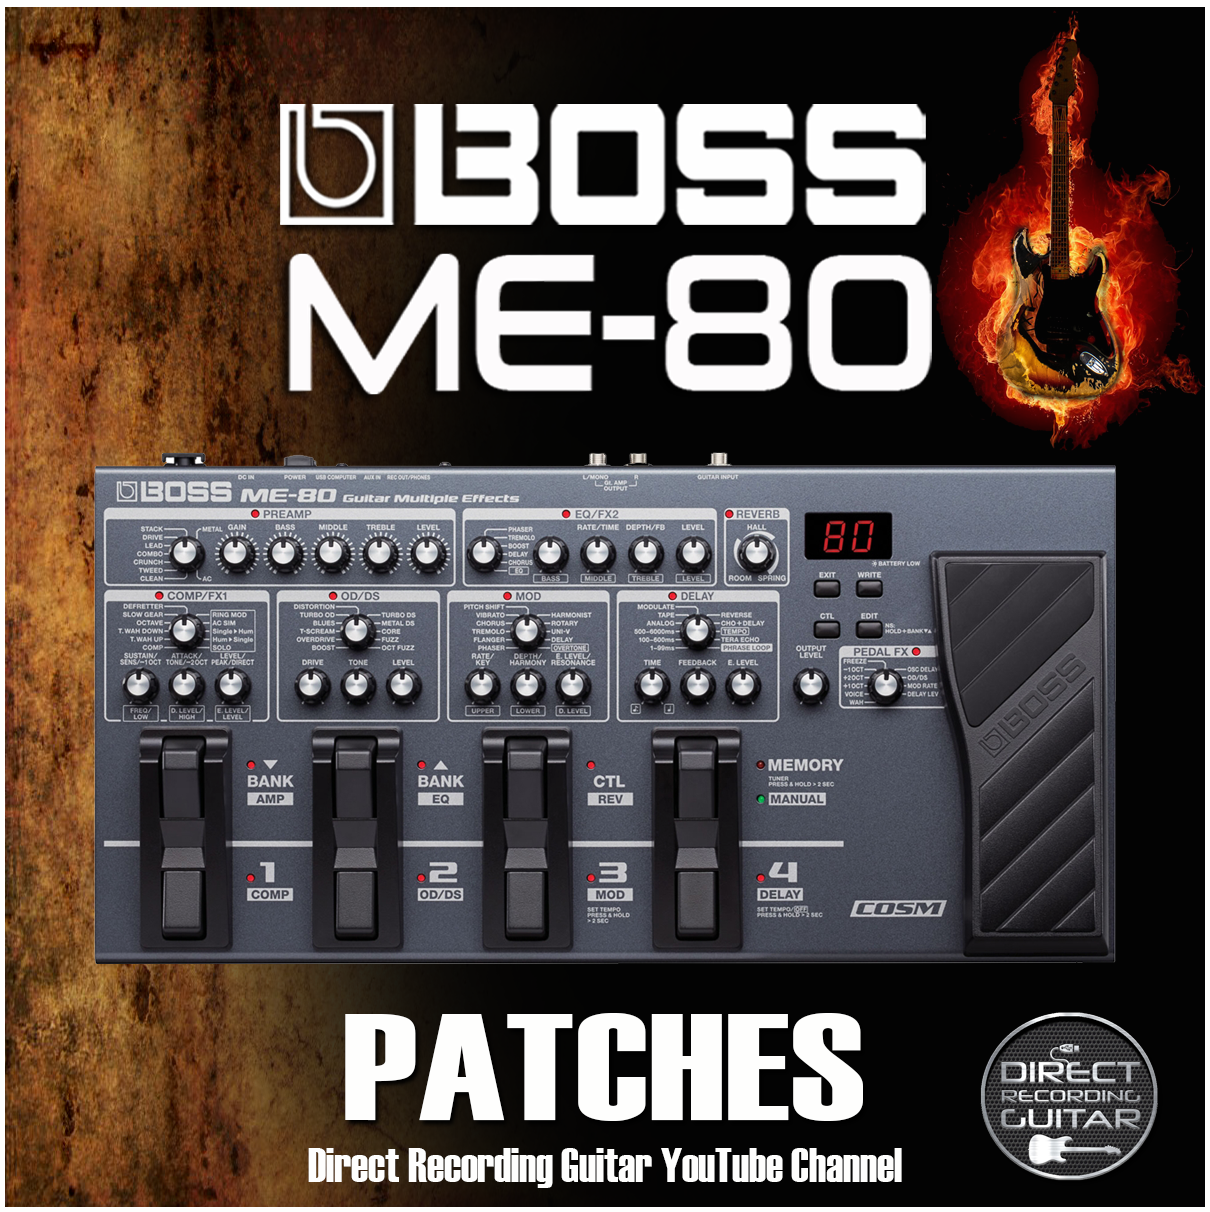 BOSS ME 80 Patches Guitar Presets - Payhip